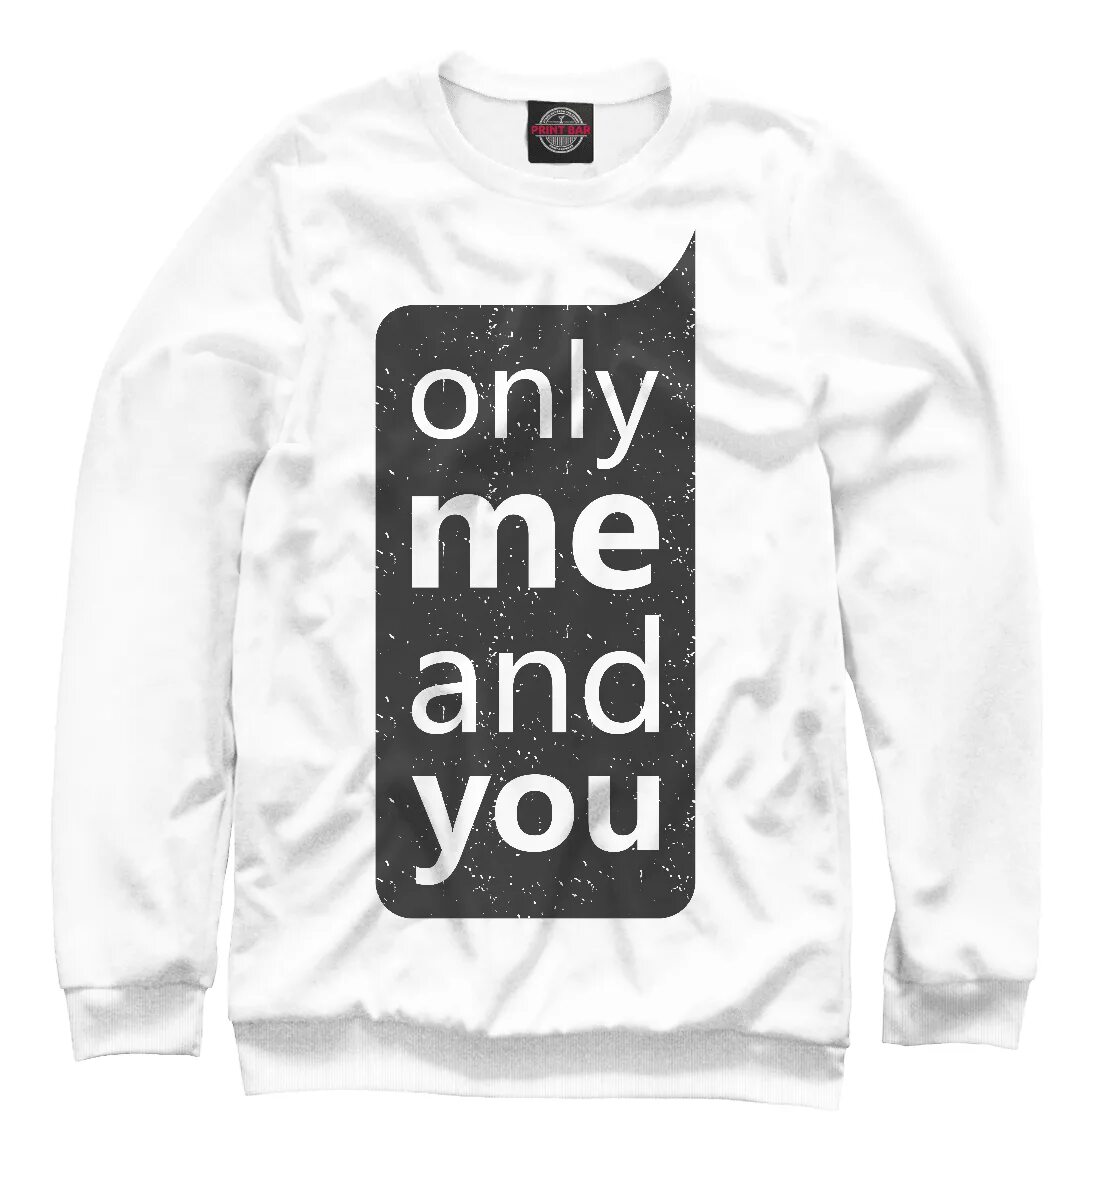 Only print. Футболка Онли only you. Черная футболка Онли only you. Only me. Trust only me картинки.